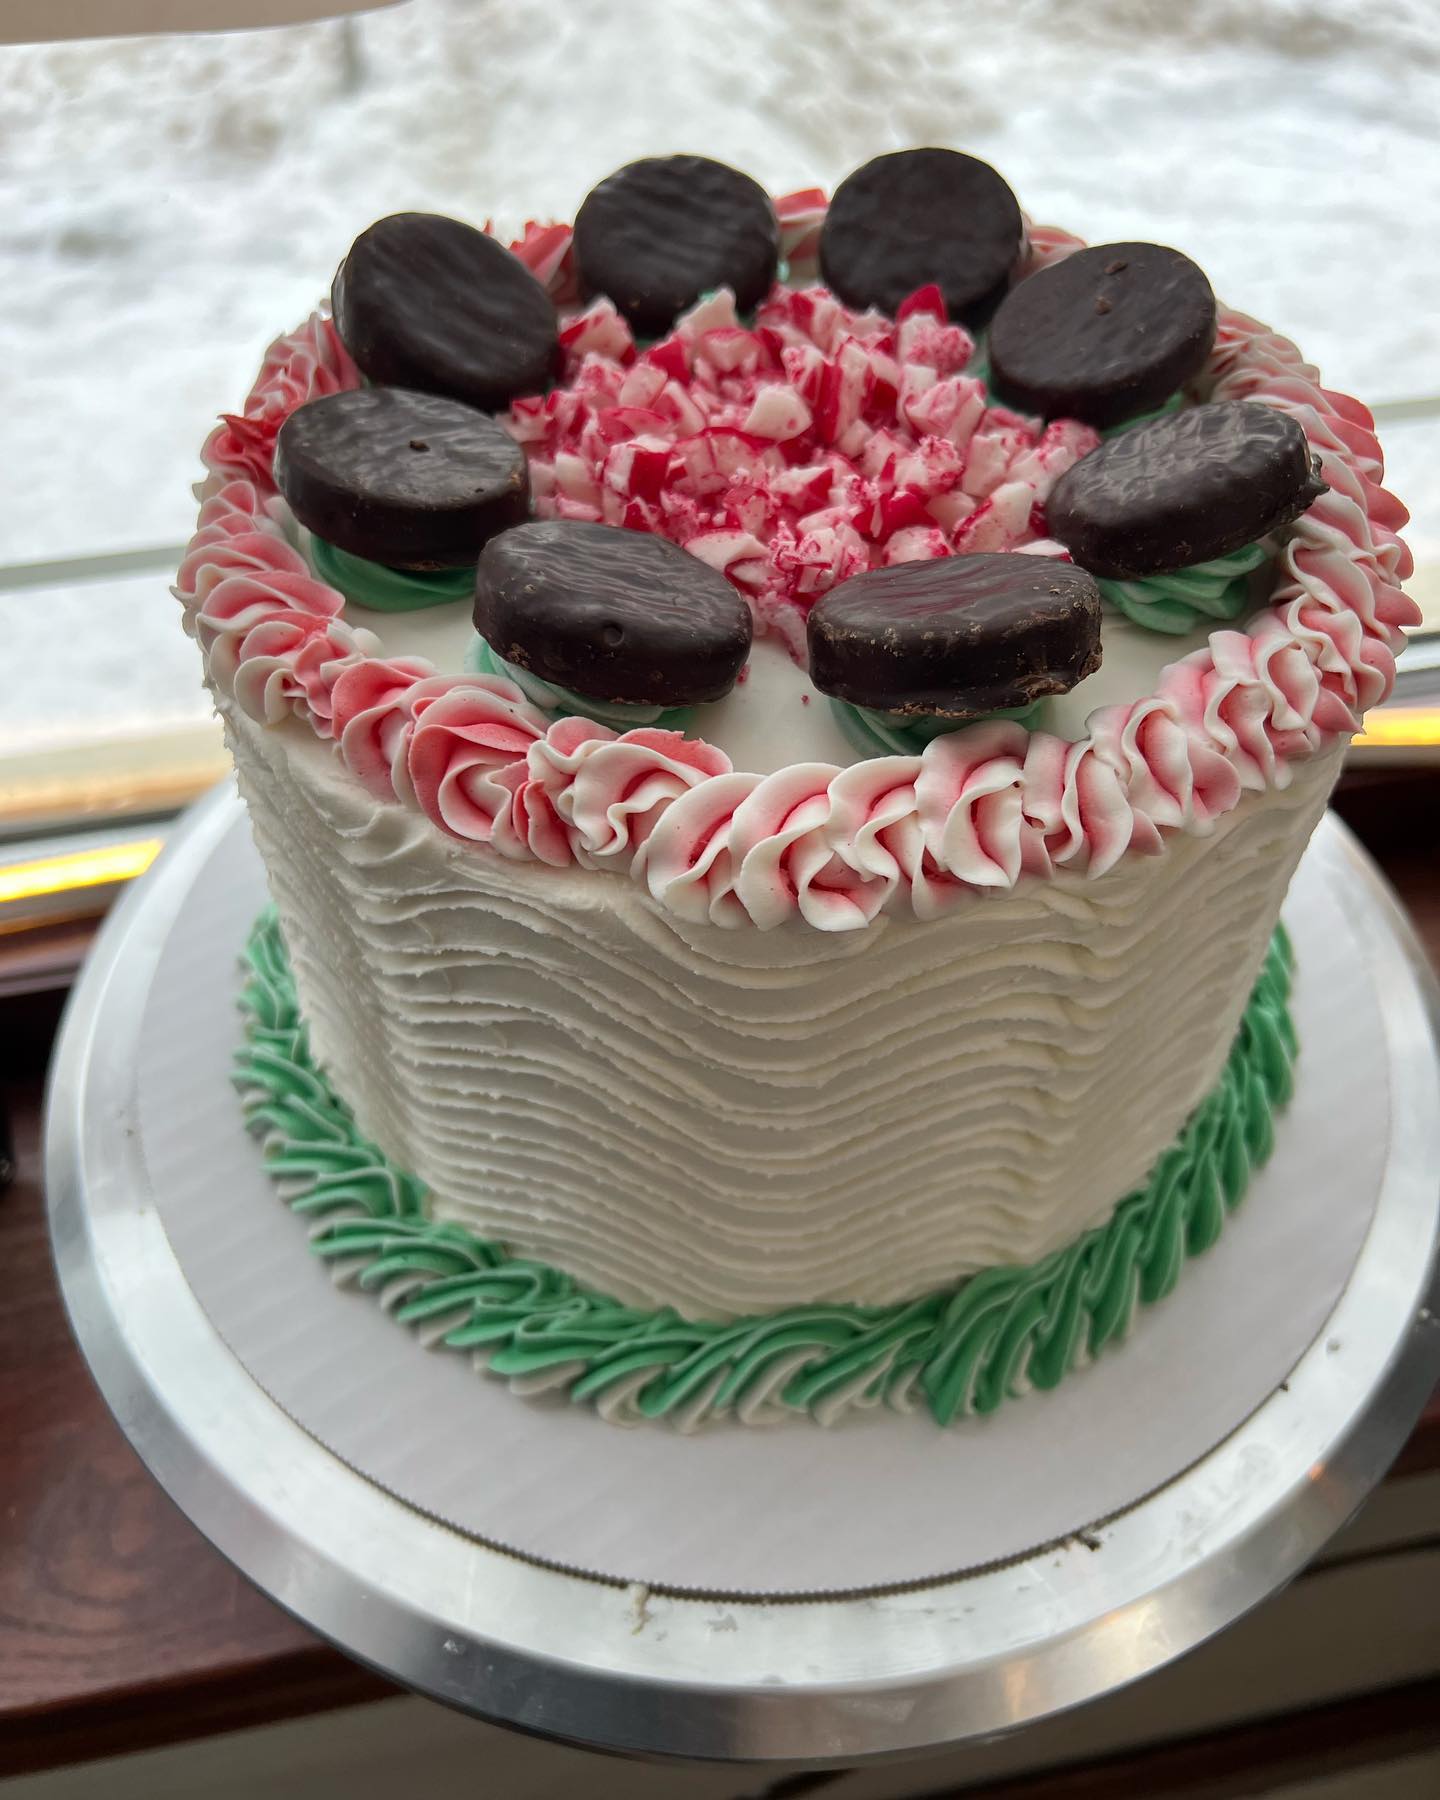 Large Cake- this one is Peppermint Stick Ice Cream with Peppermint Patties